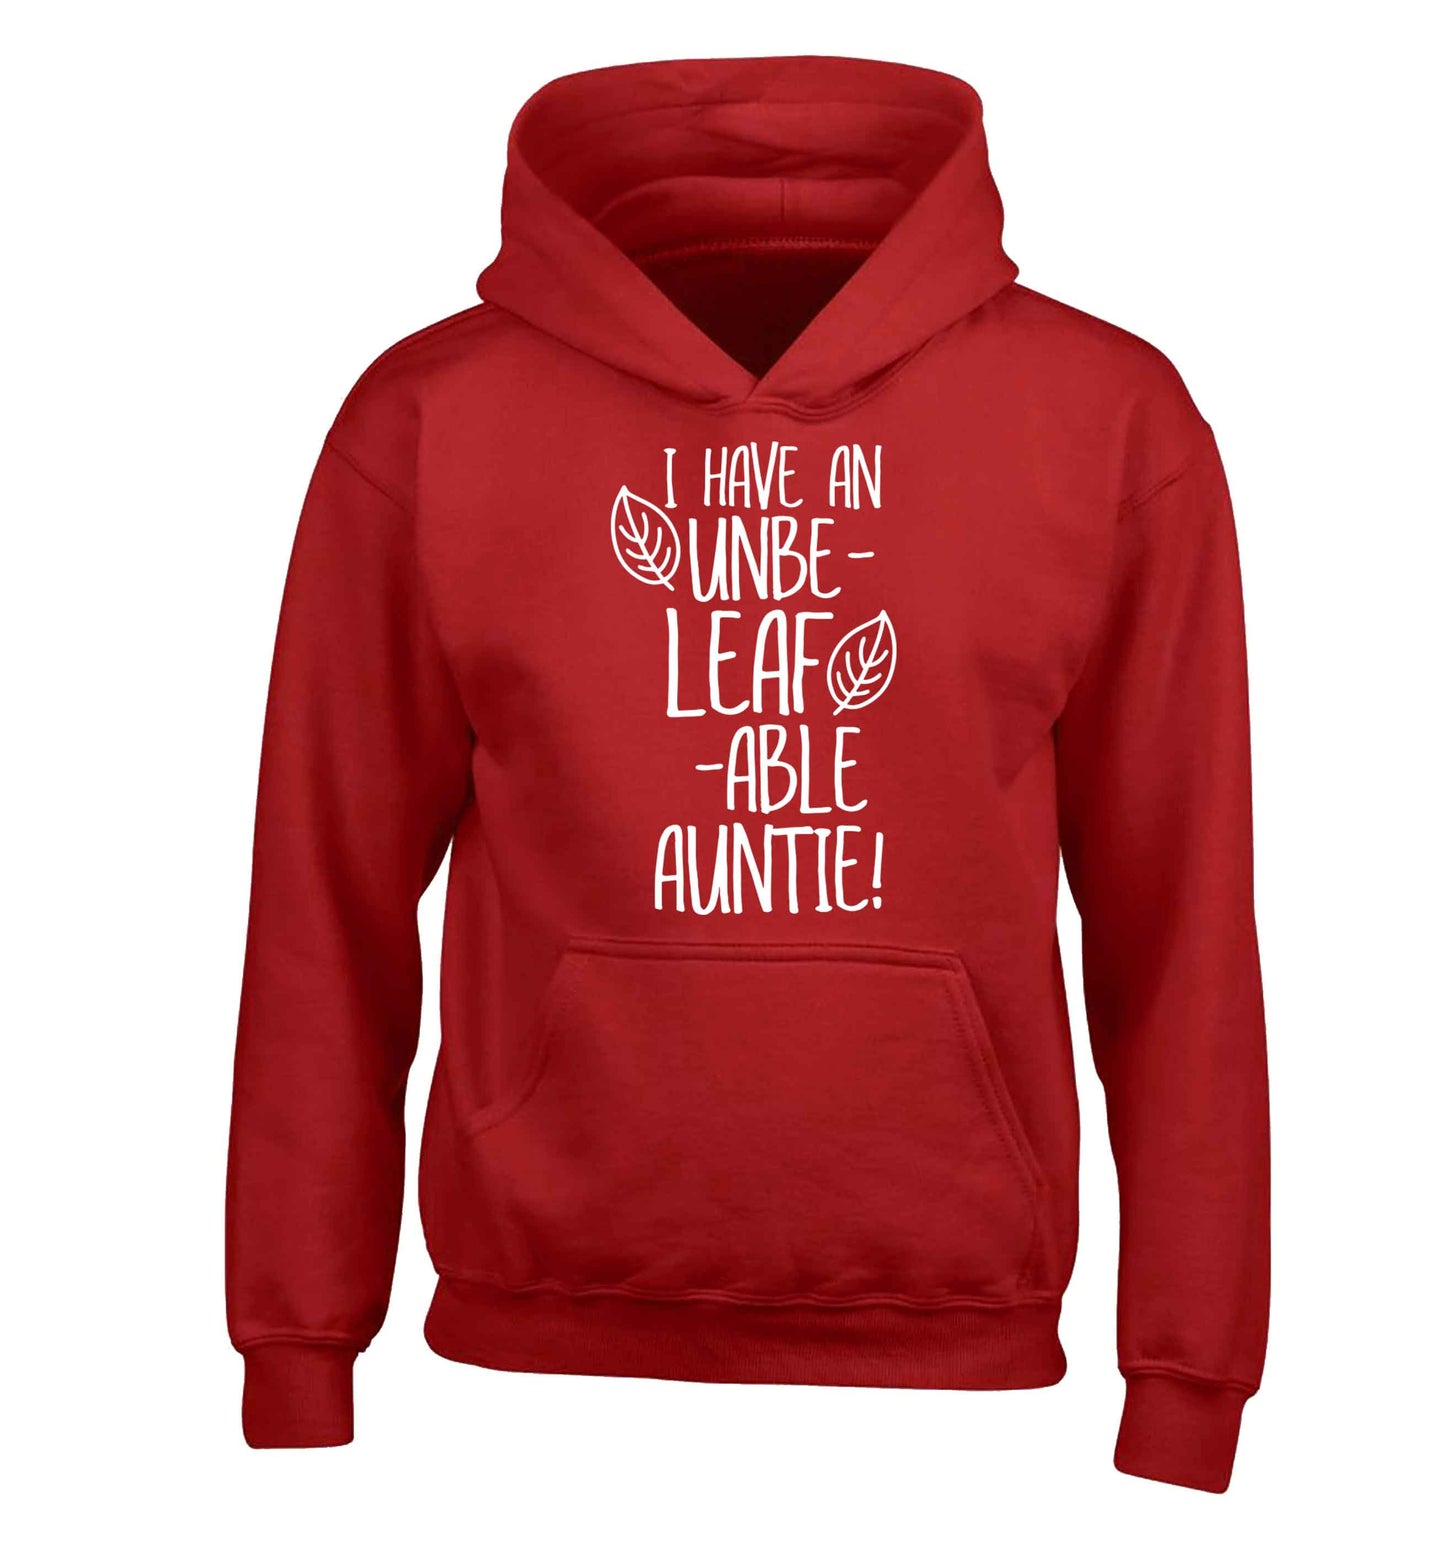 I have an unbe-leaf-able auntie children's red hoodie 12-13 Years